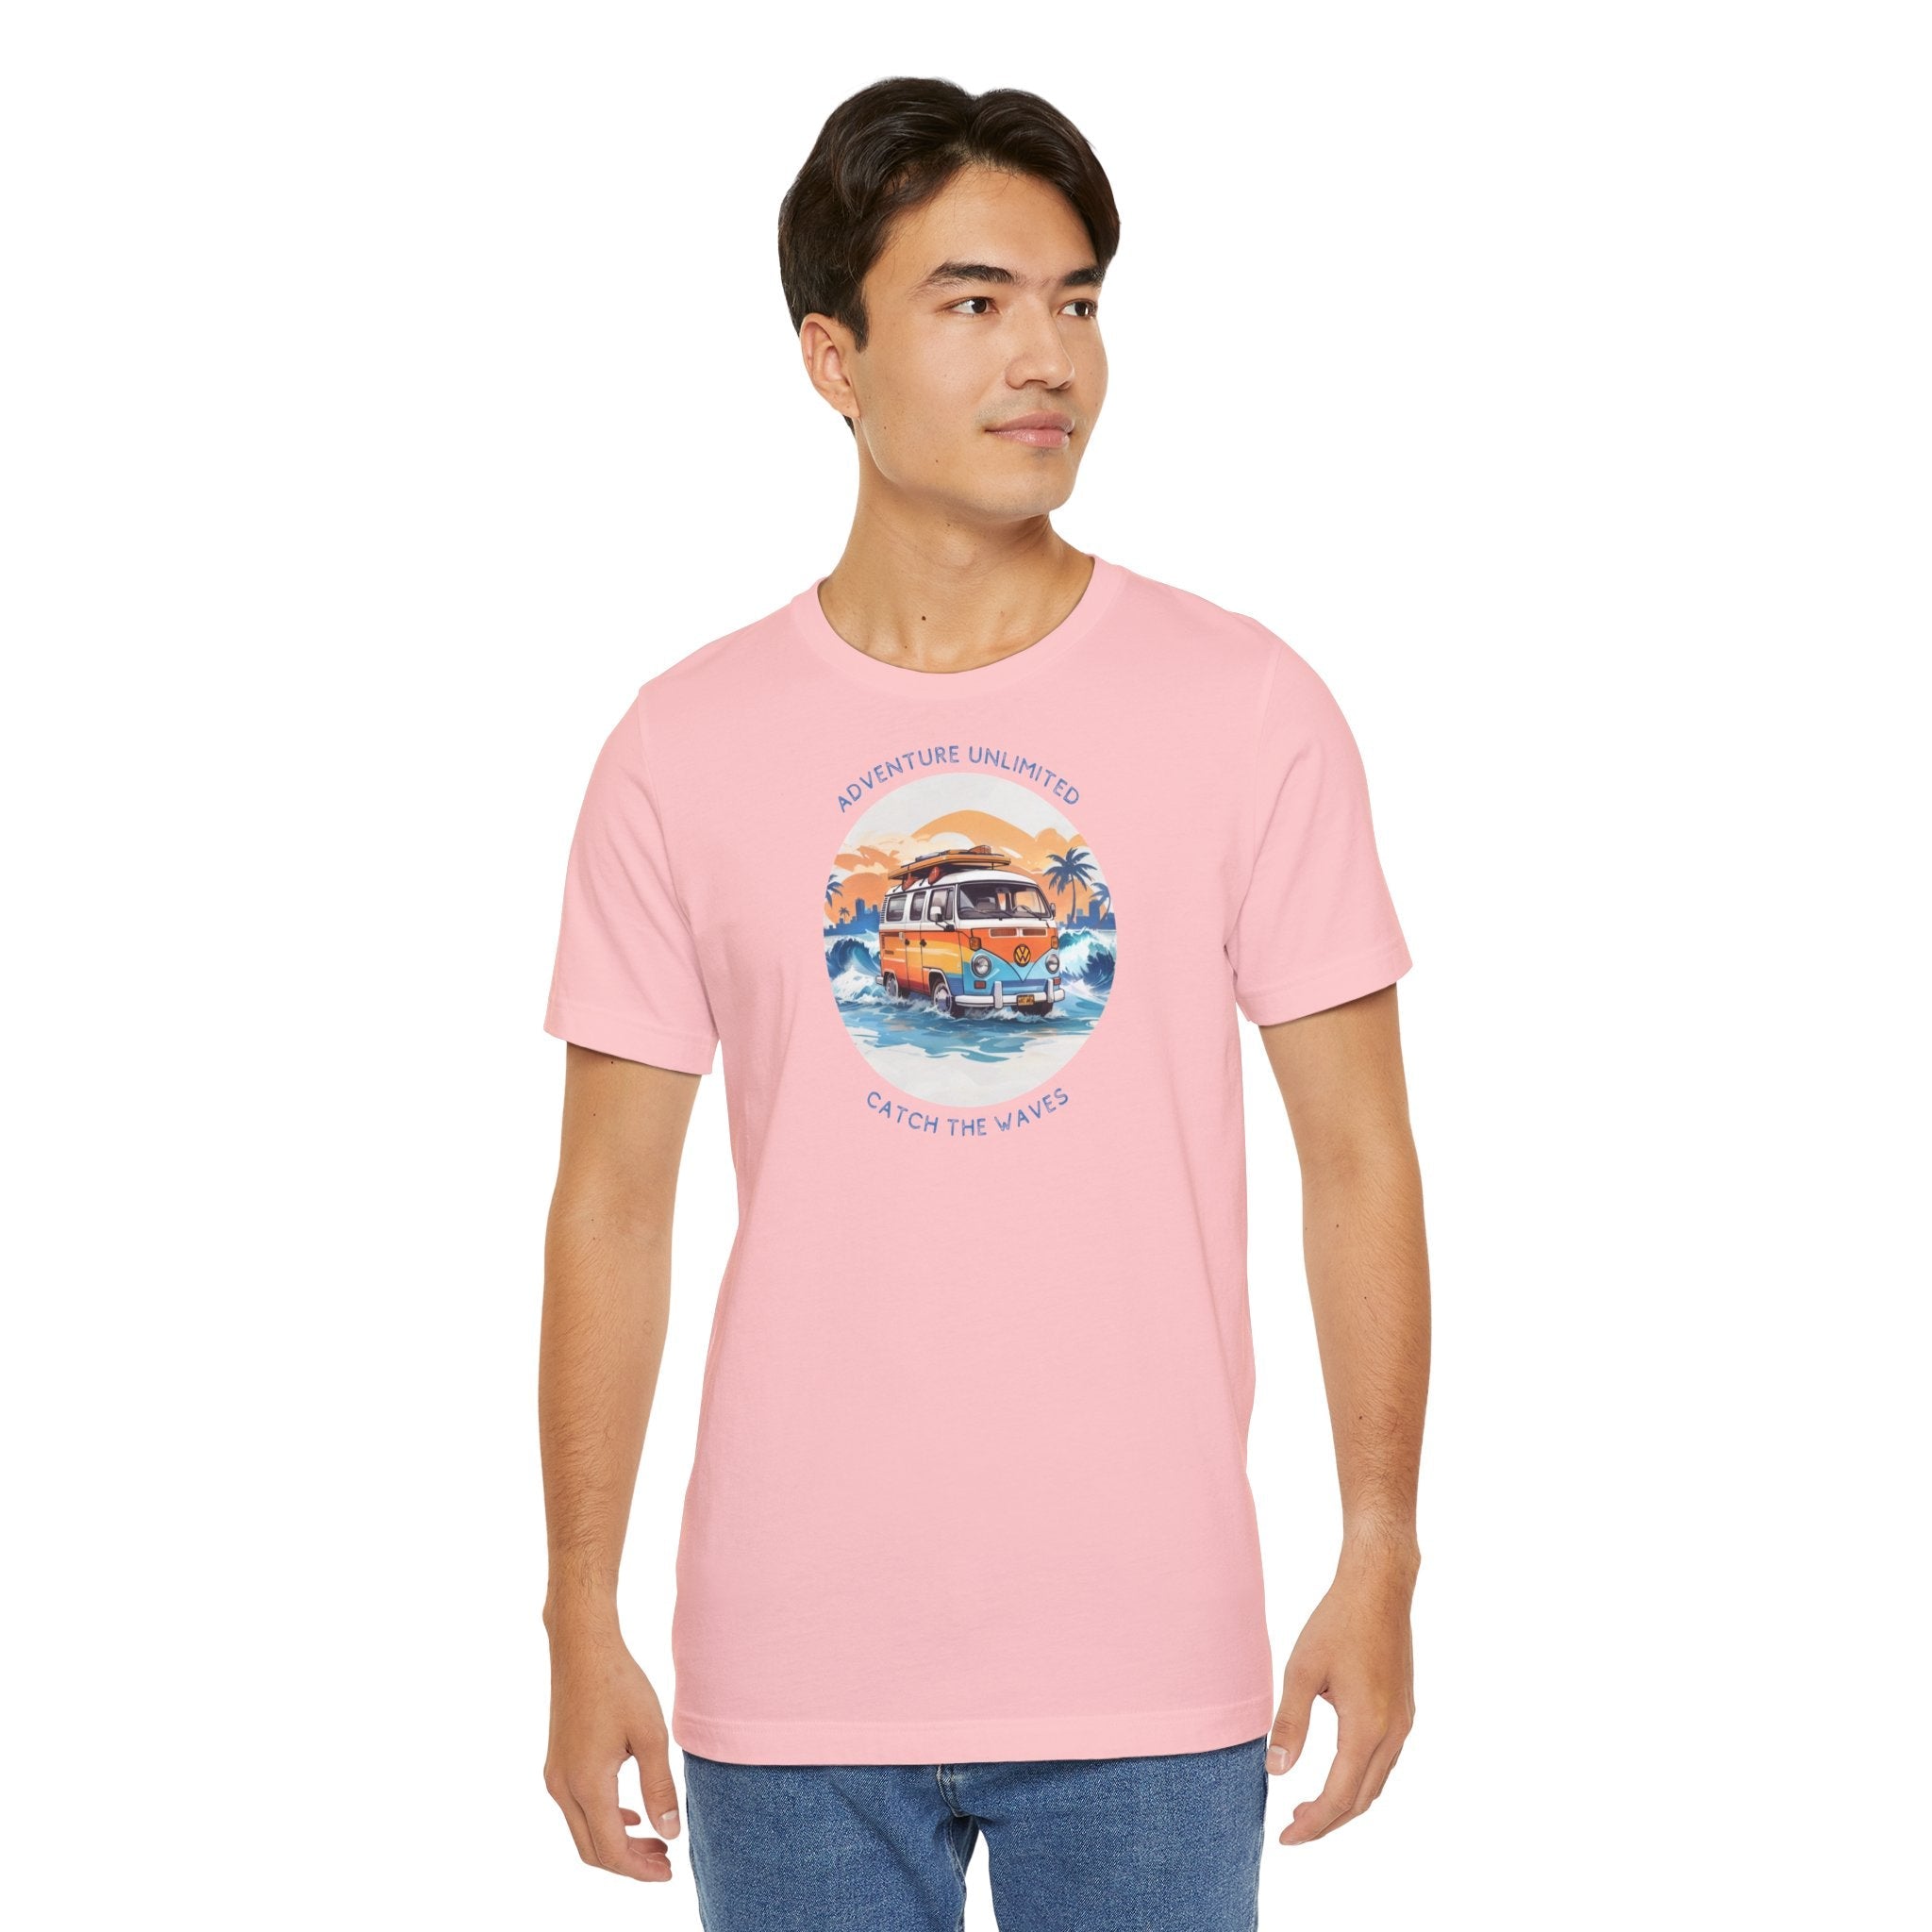 Adventure Unlimited - Surfing T-Shirt with ’I’m’ printed on a man in pink Bella & Canvas EU tee